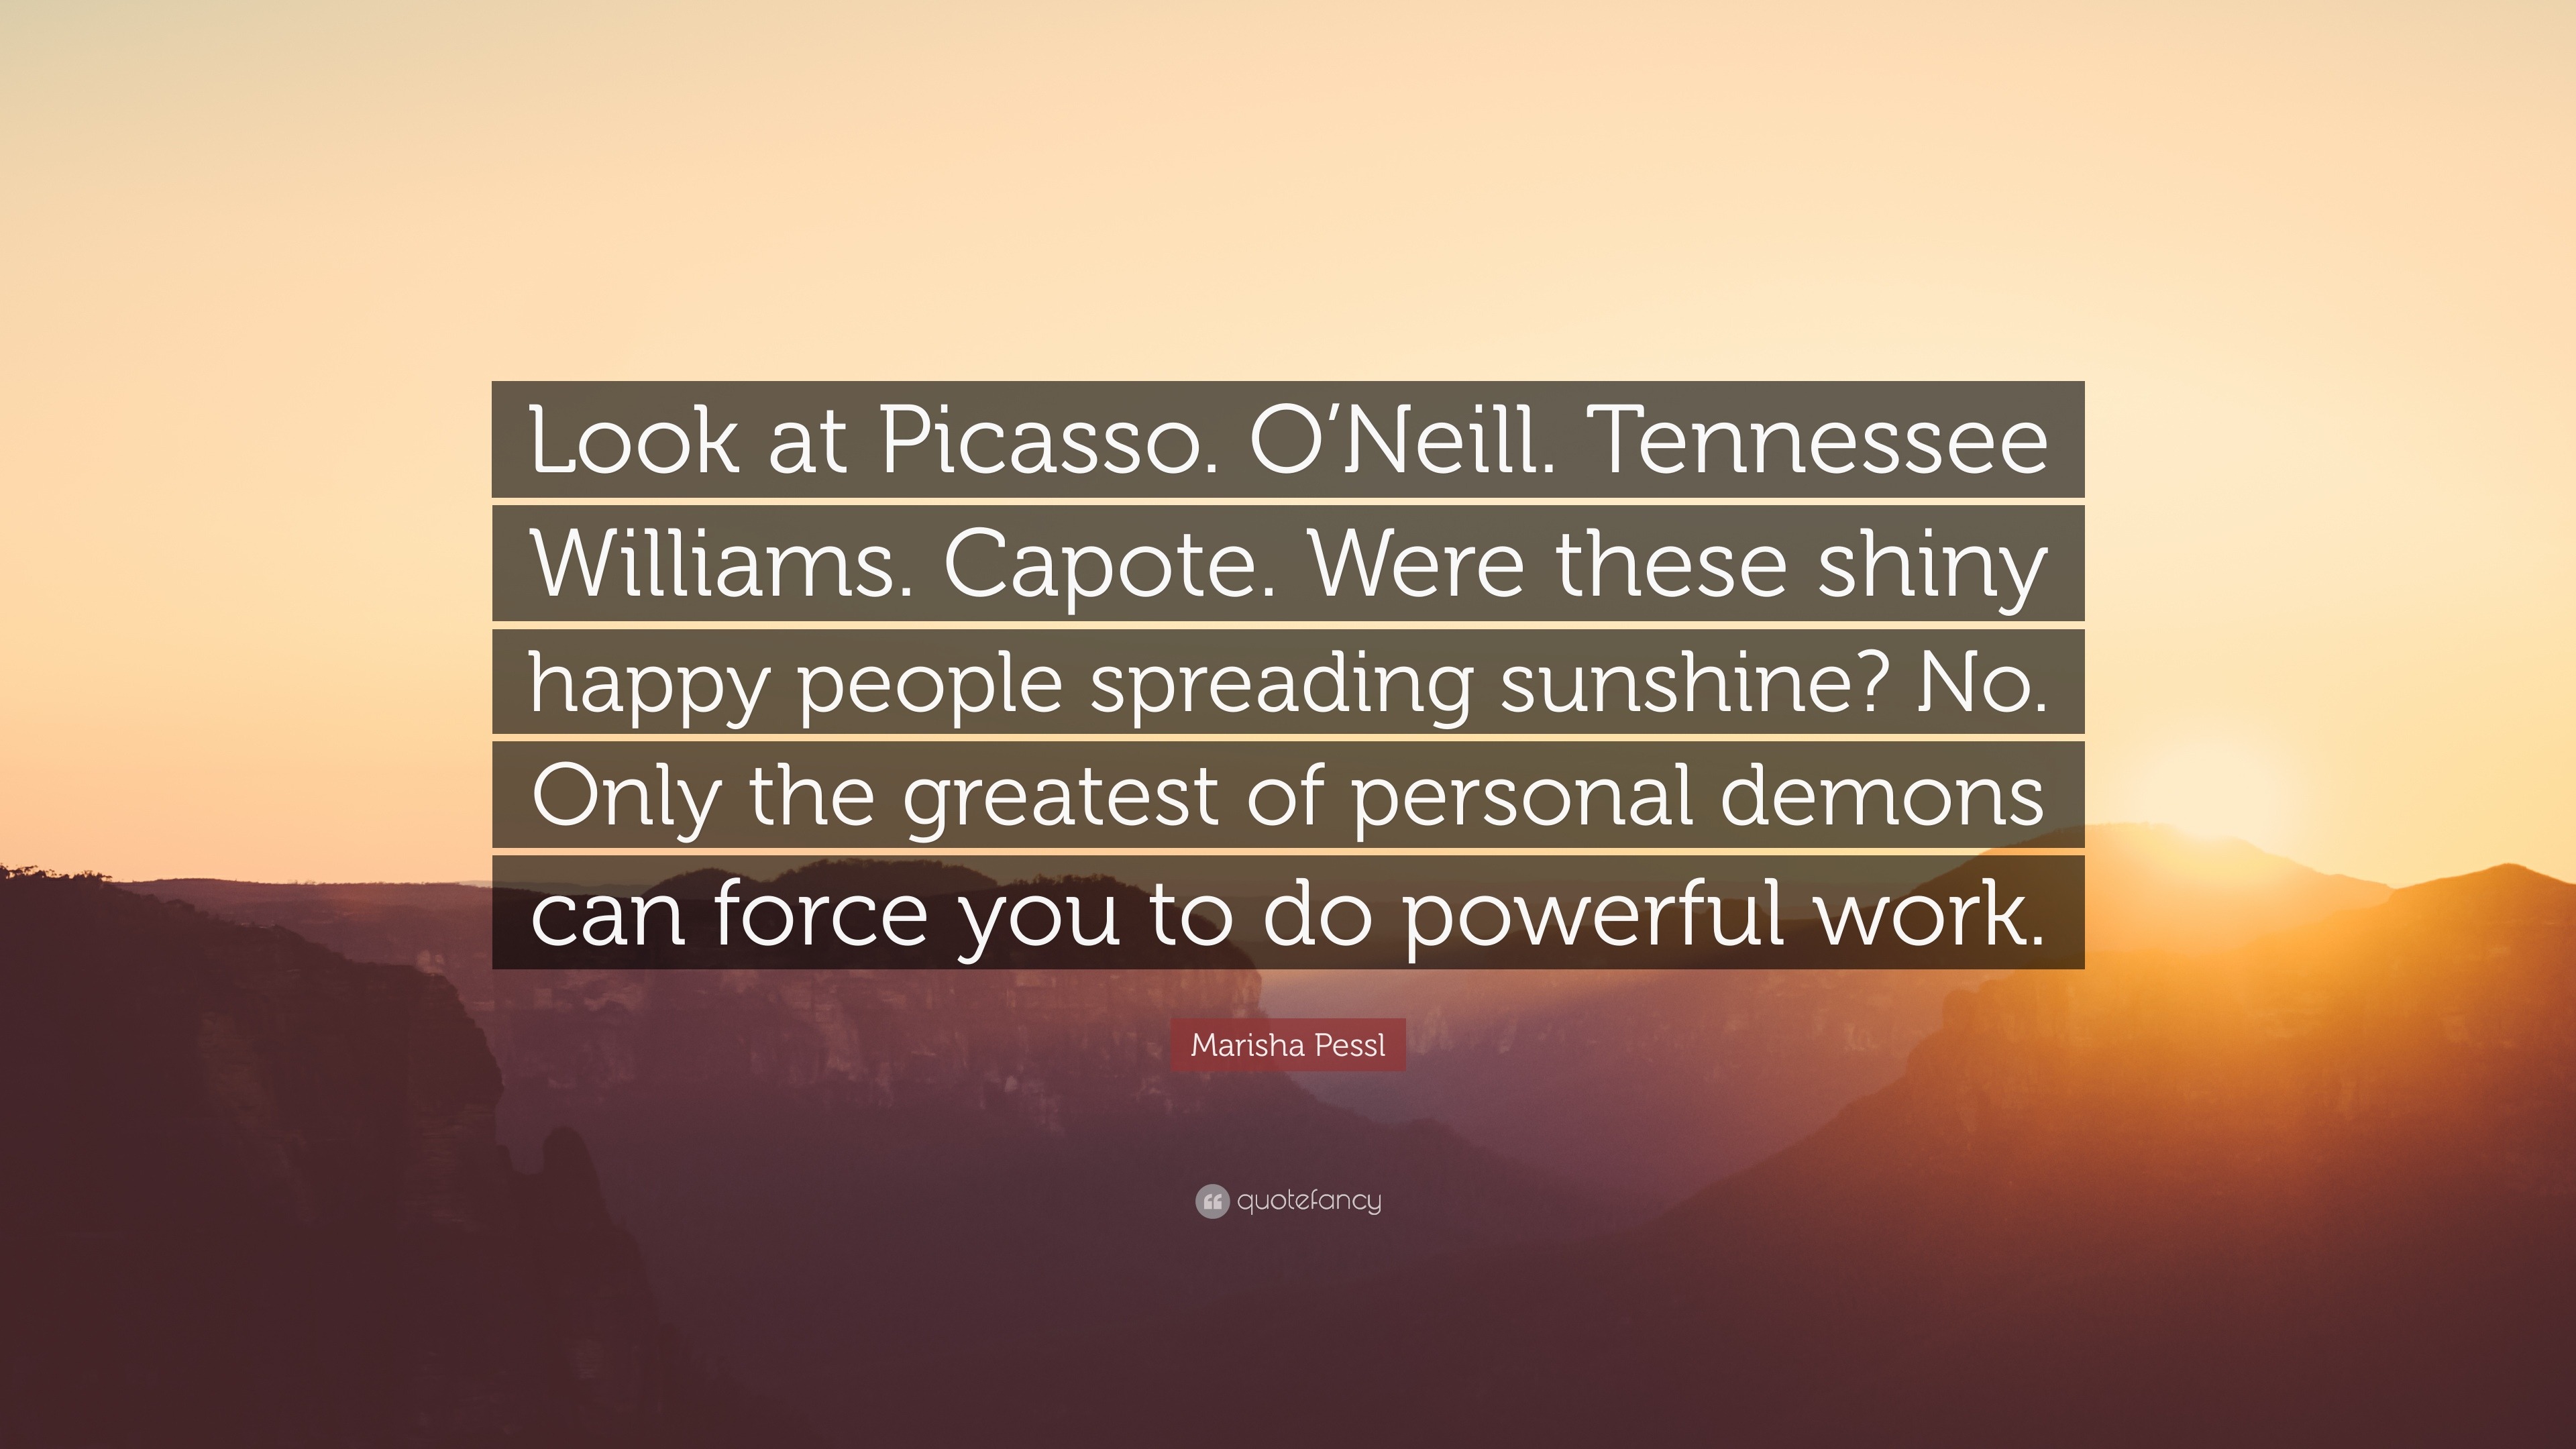 Marisha Pessl Quote Look At Picasso O Neill Tennessee Williams Capote Were These Shiny Happy People Spreading Sunshine No Only The Gre